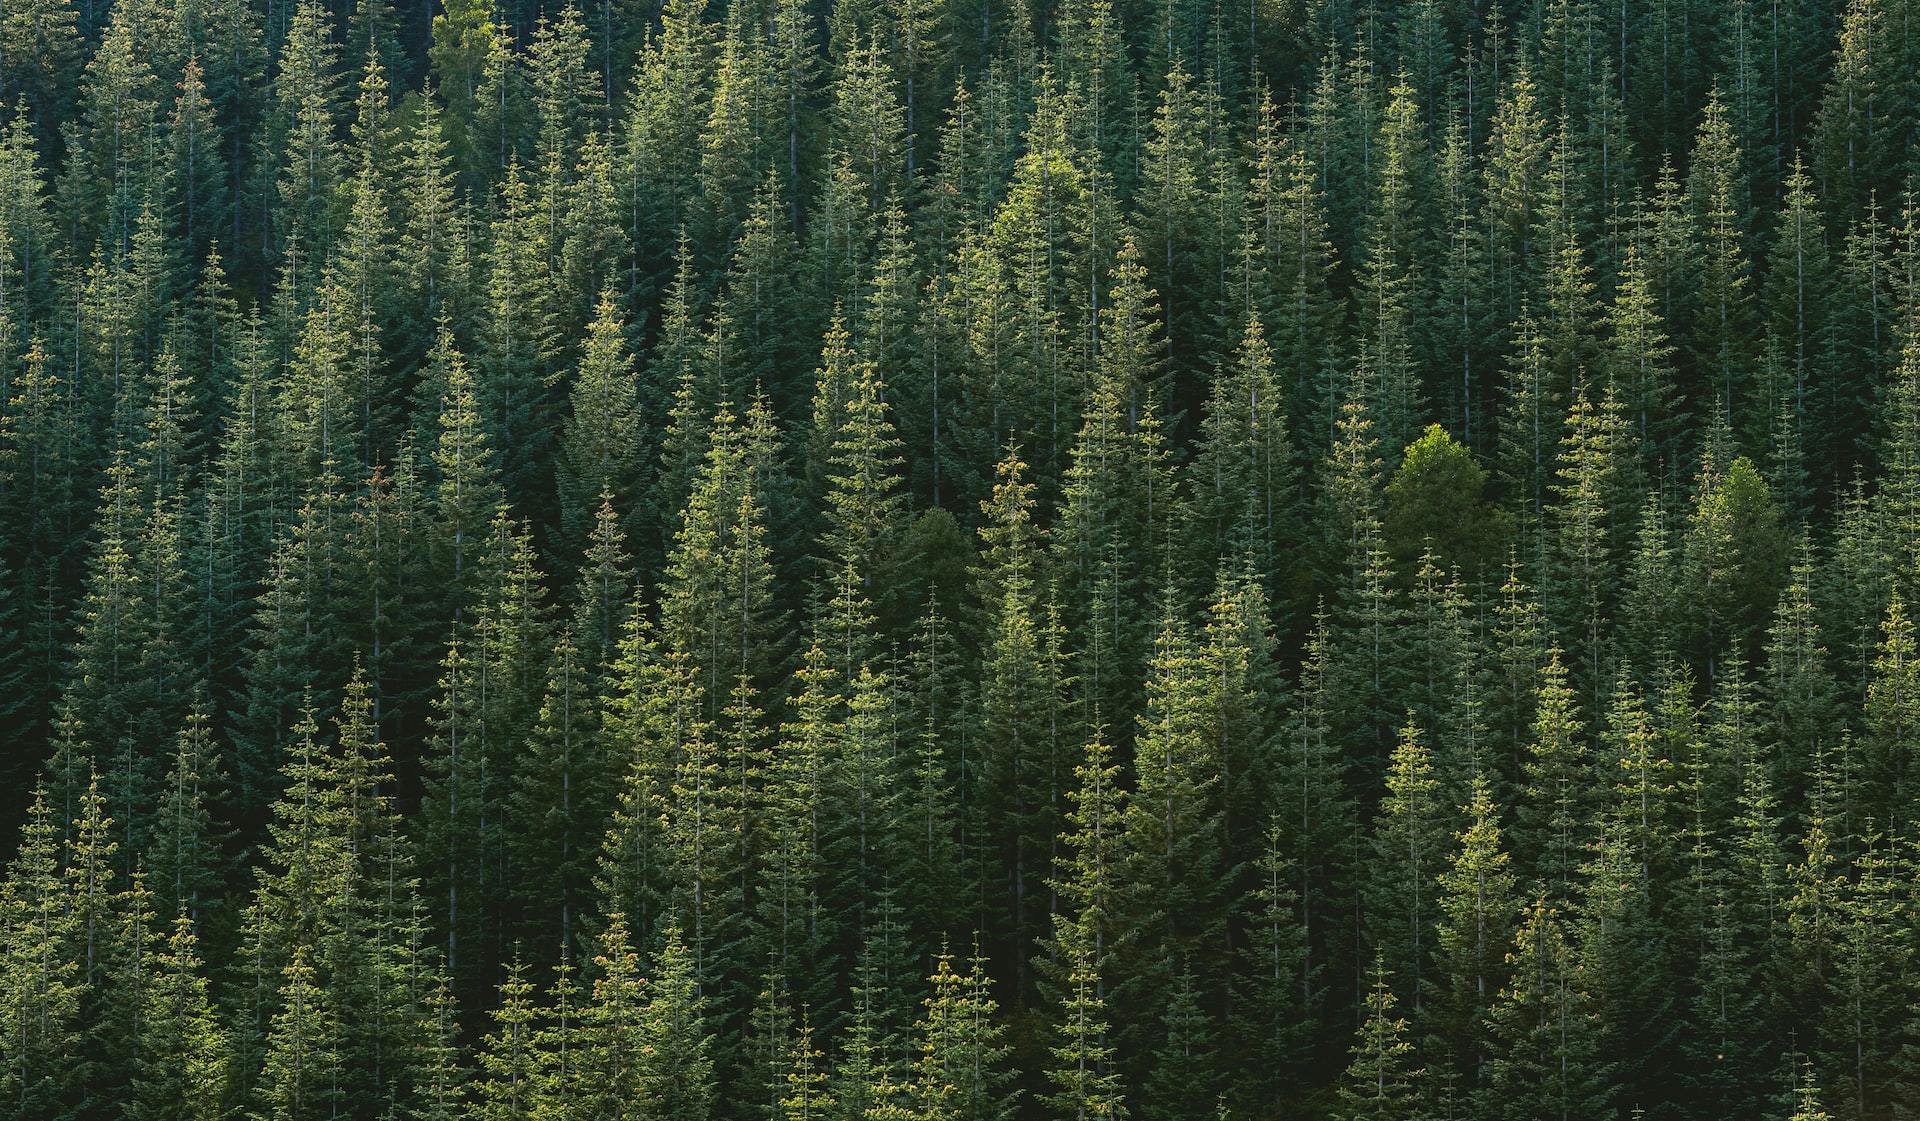 A thick forest of evergreen trees